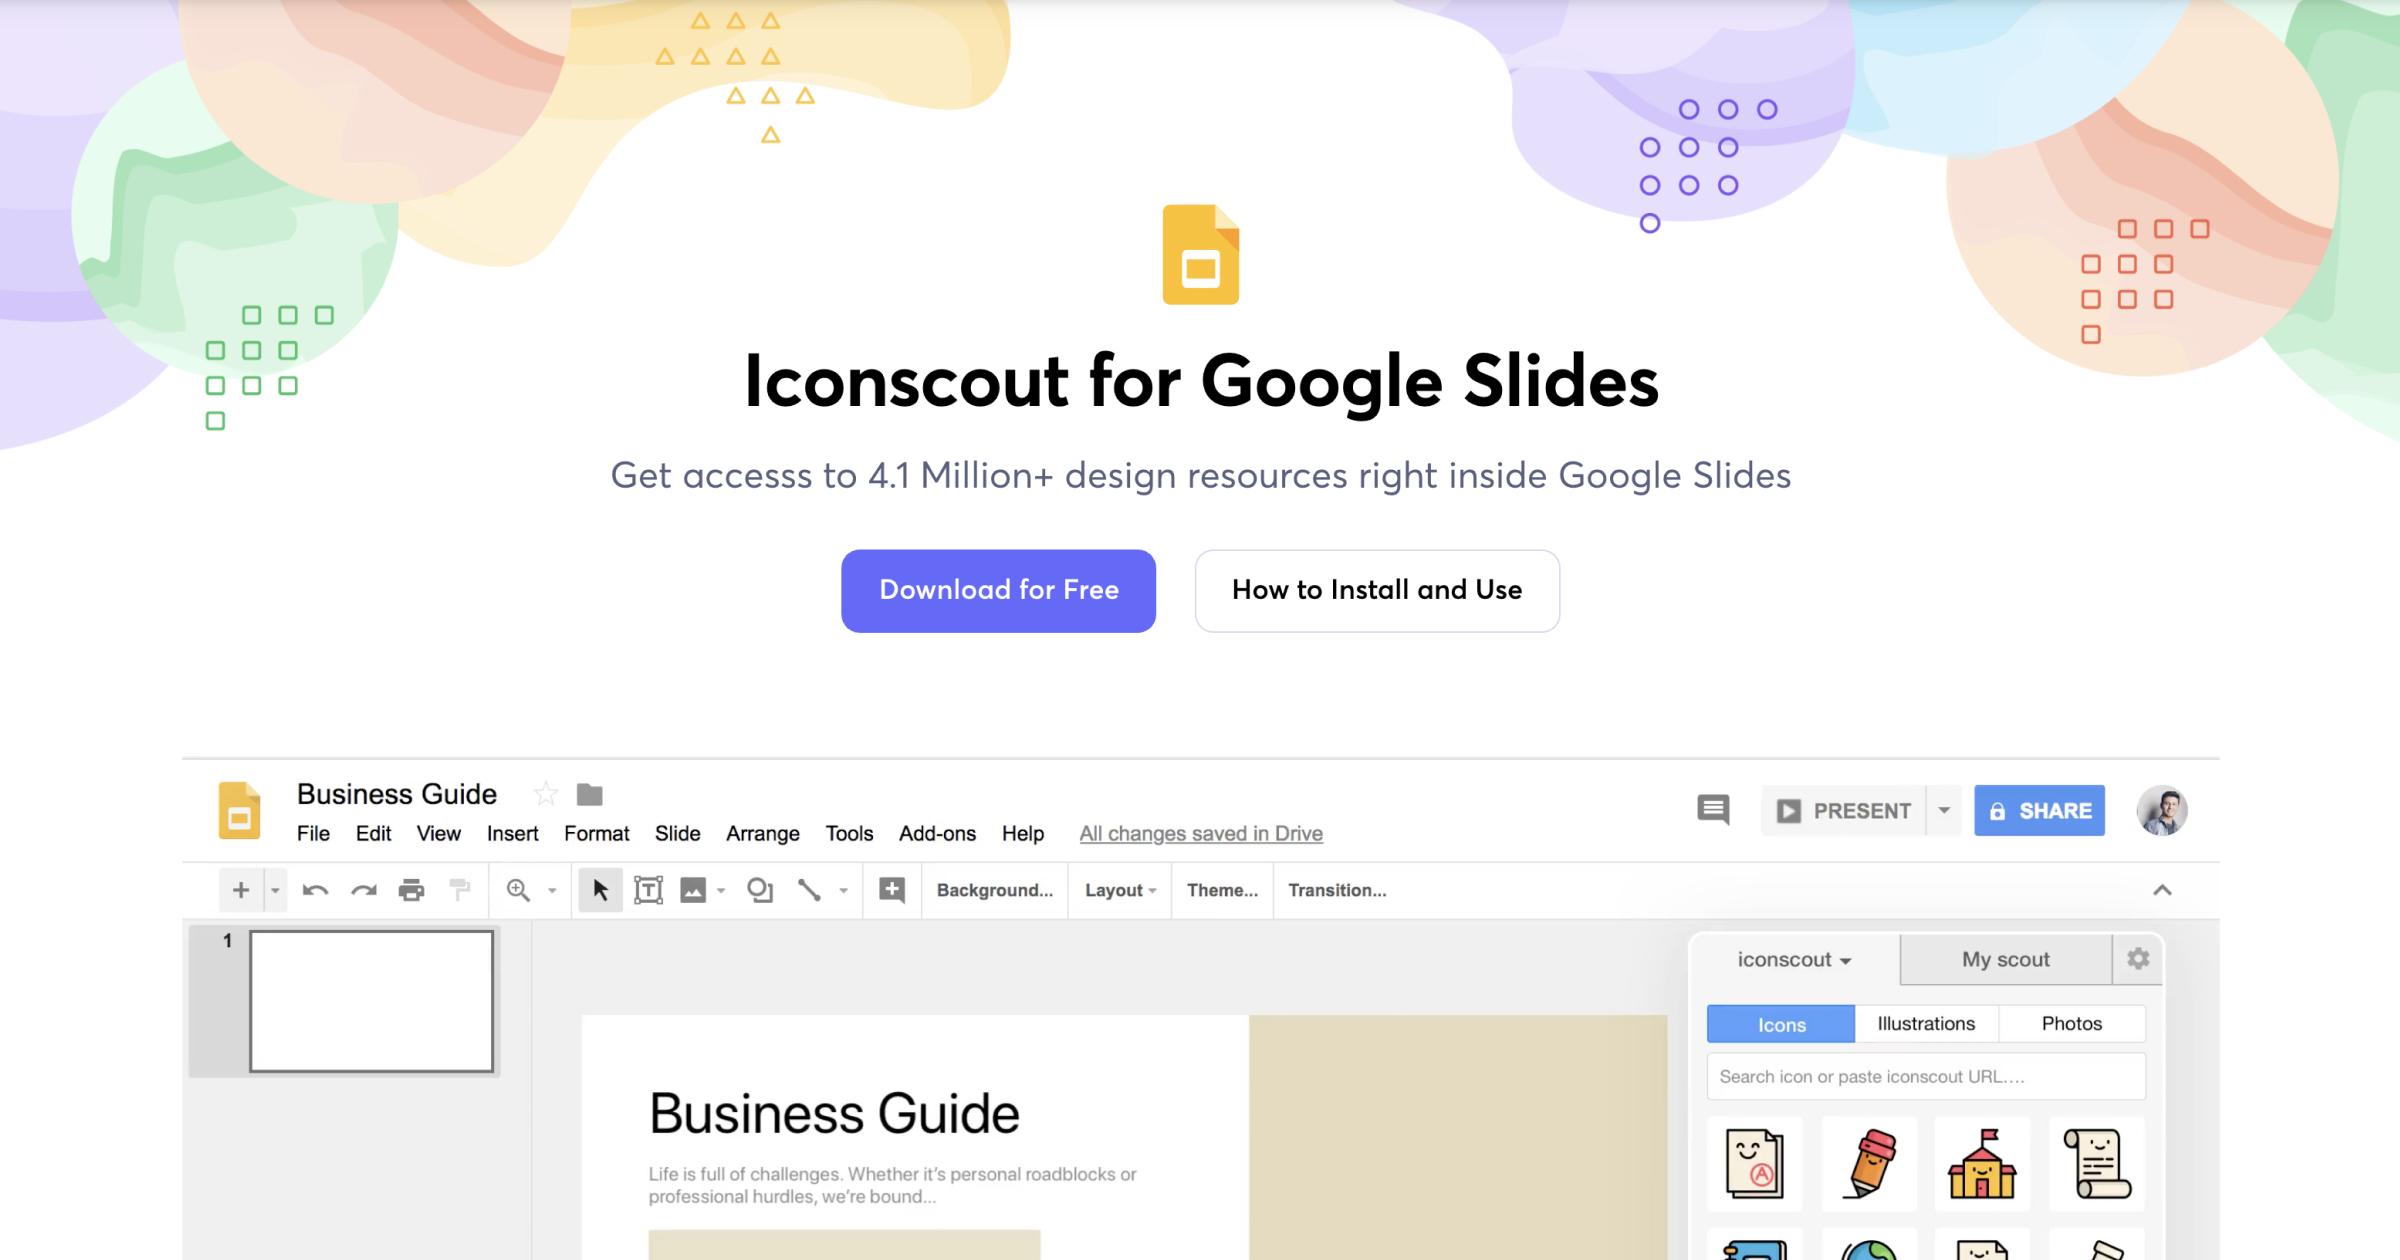 Icons, Illustrations, 3D Assets & Lottie Animations for Google Slides  Plugin - IconScout